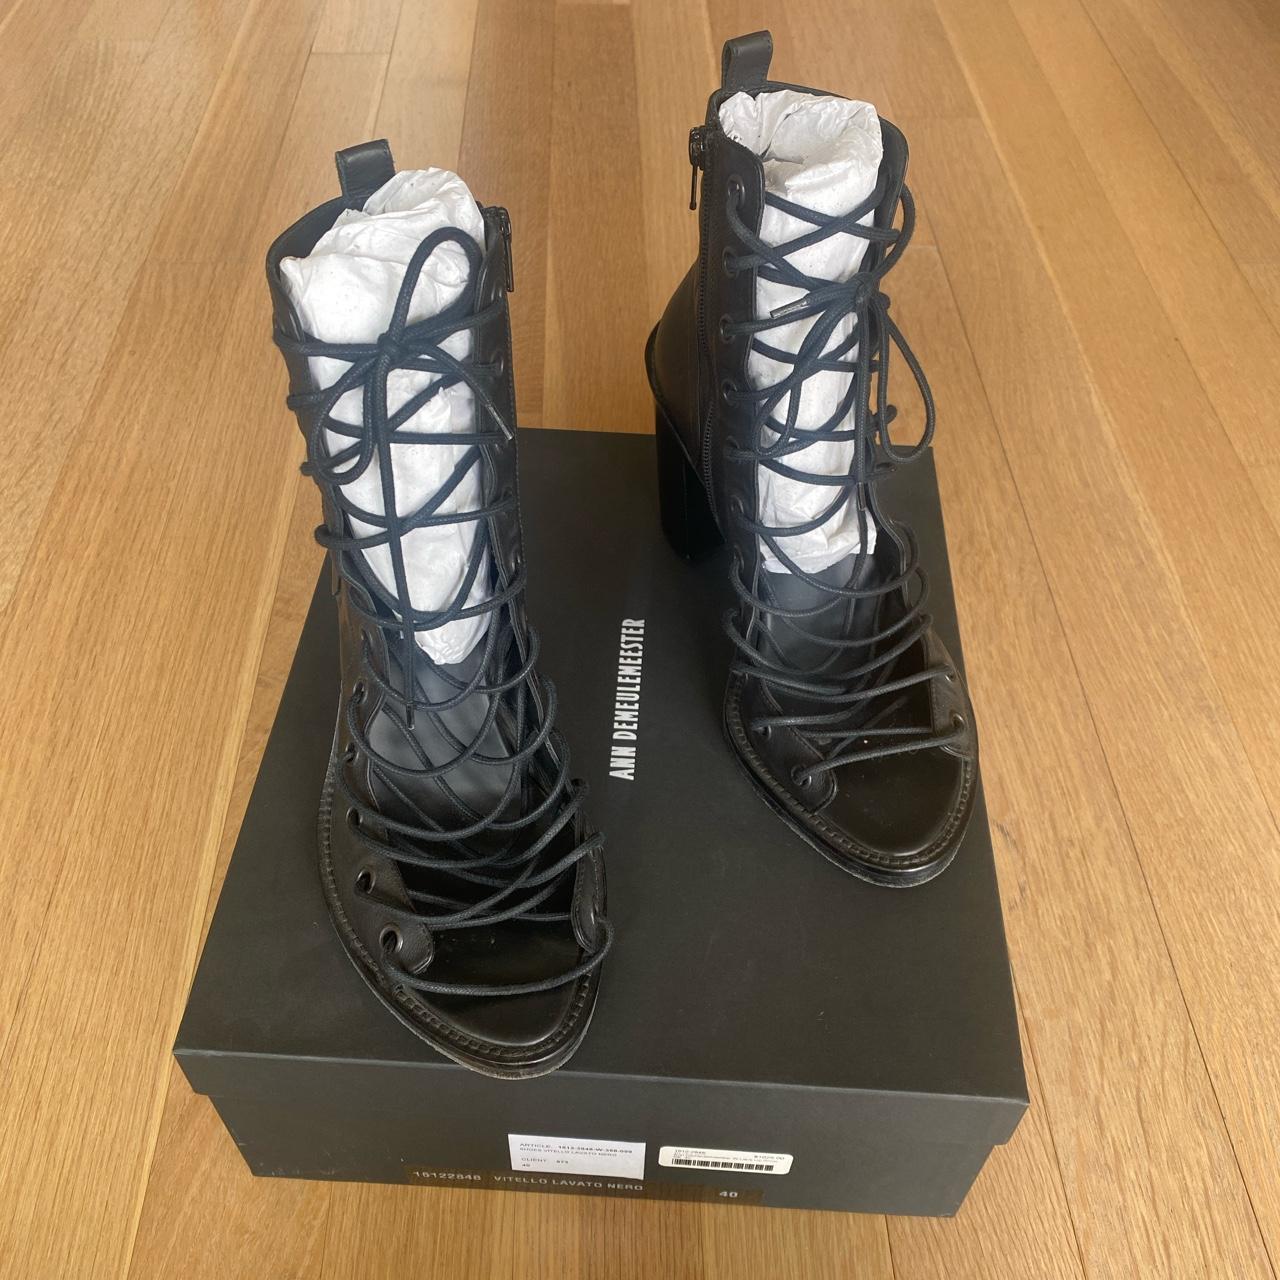 Product Image 1 - Iconic Ann Demeulemeester lace ups.